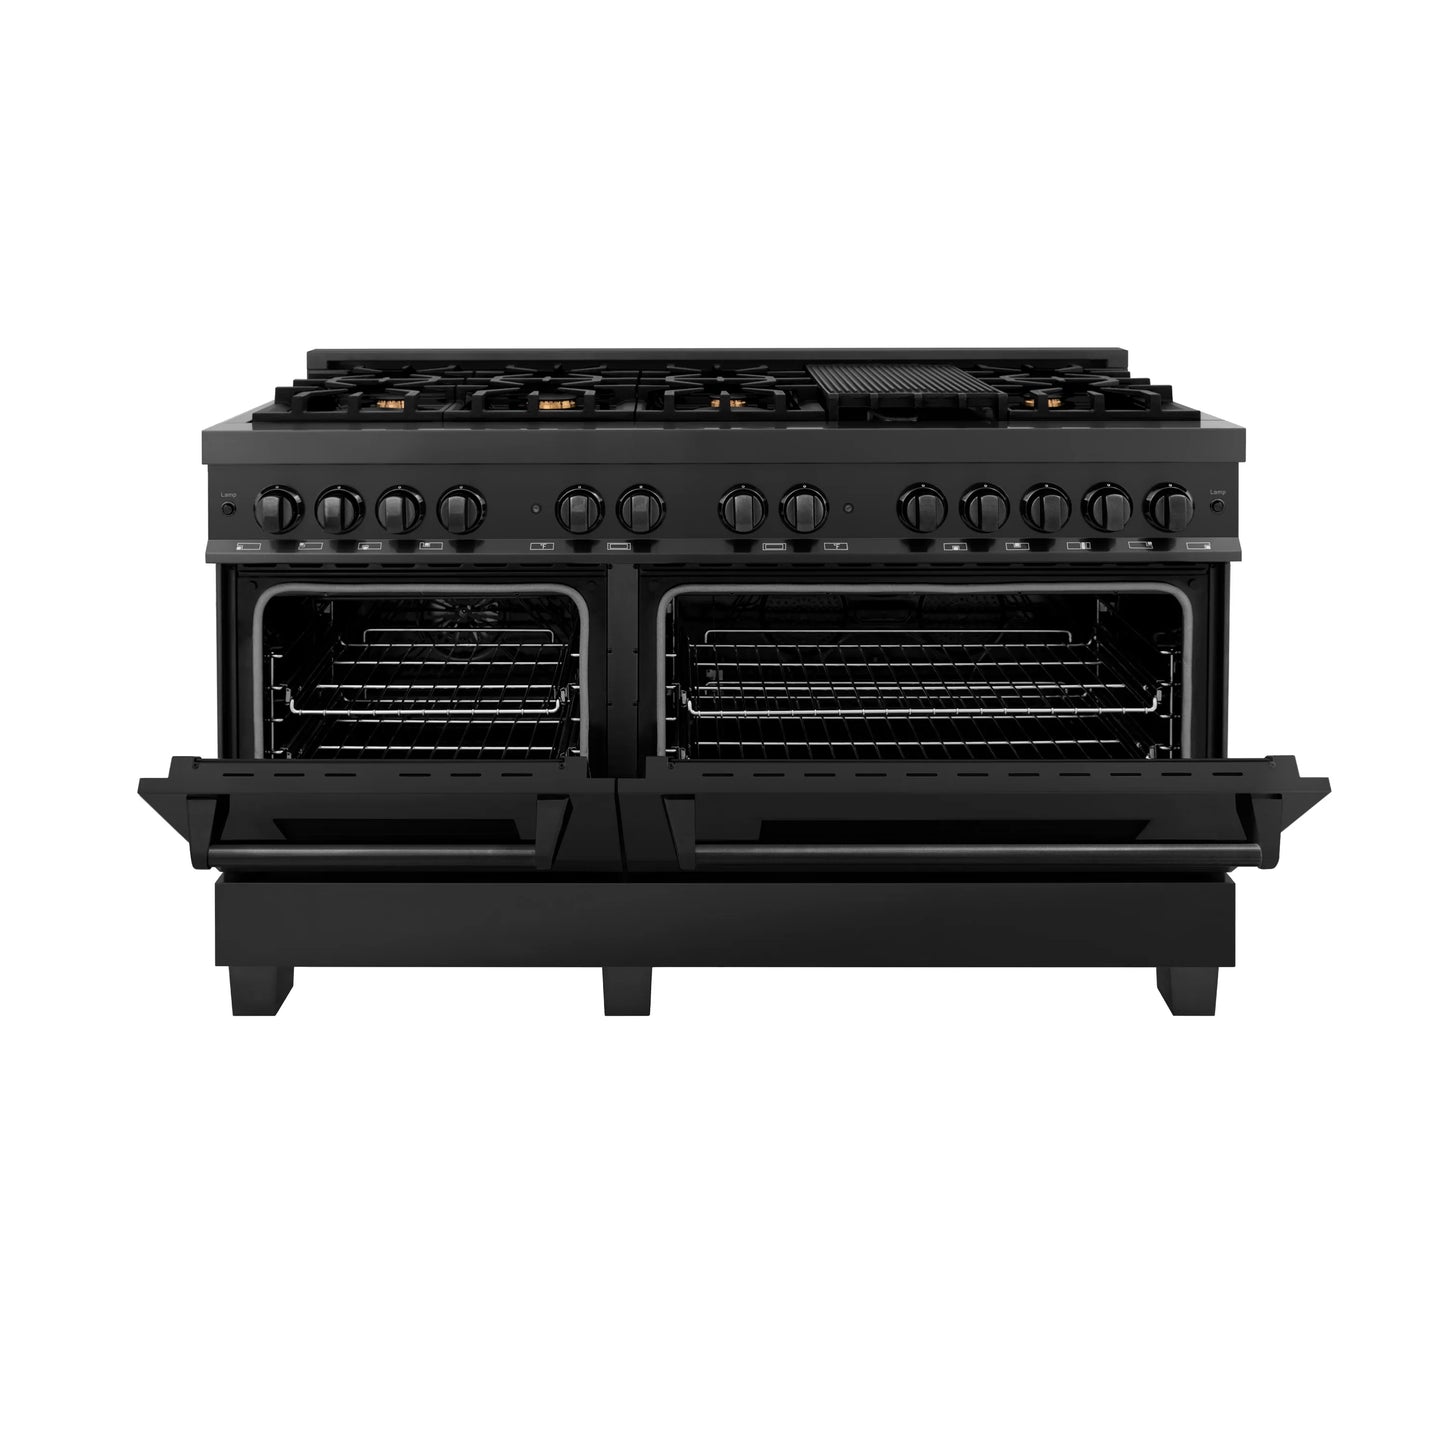 ZLINE 60" Dual Fuel Range with Gas Stove and Electric Oven in Black Stainless Steel with Brass Burners (RAB-60)